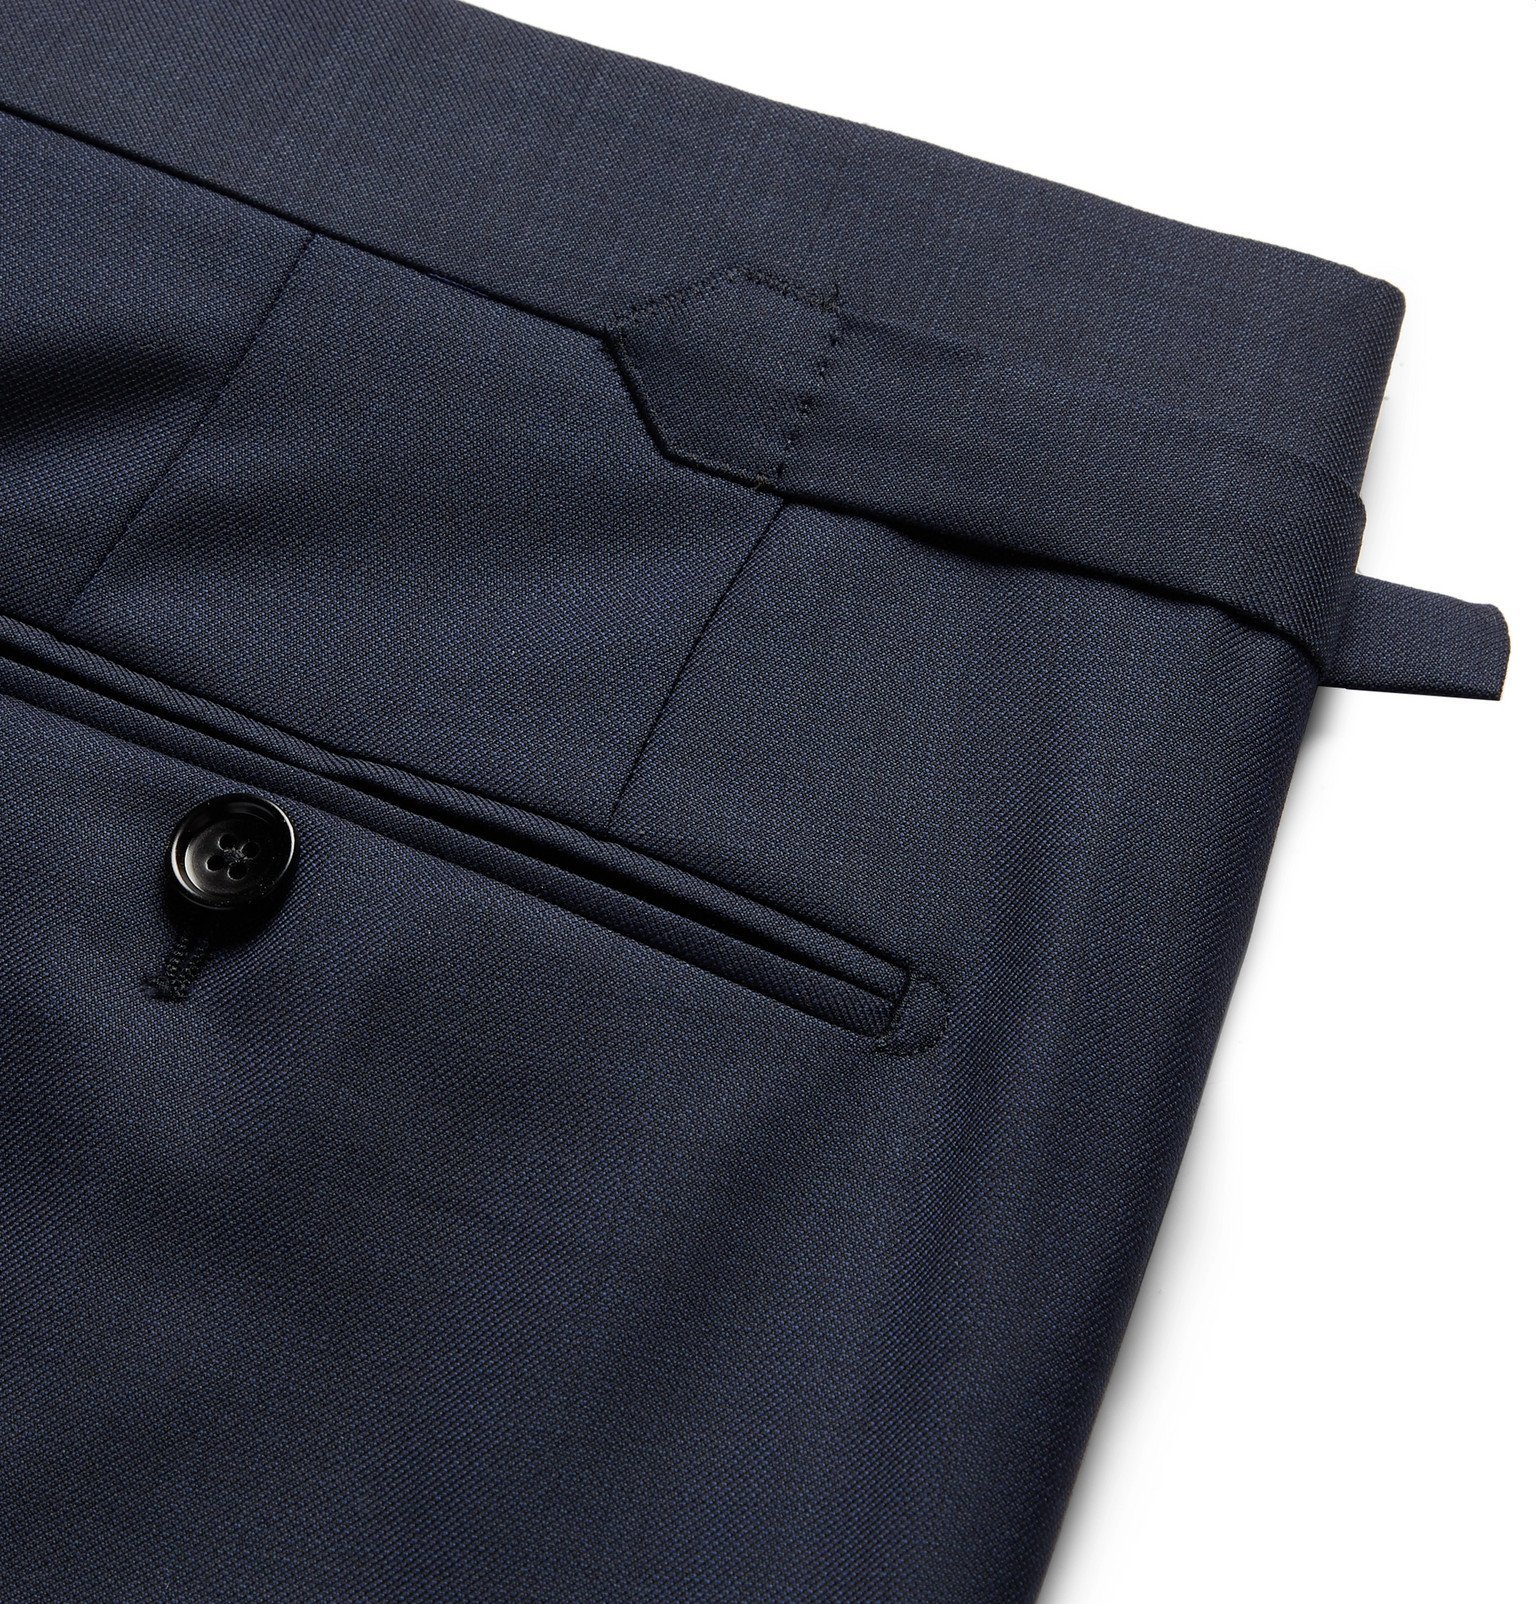 TOM FORD - Navy Slim-Fit Super 110s Wool-Sharkskin Suit Trousers - Blue TOM  FORD